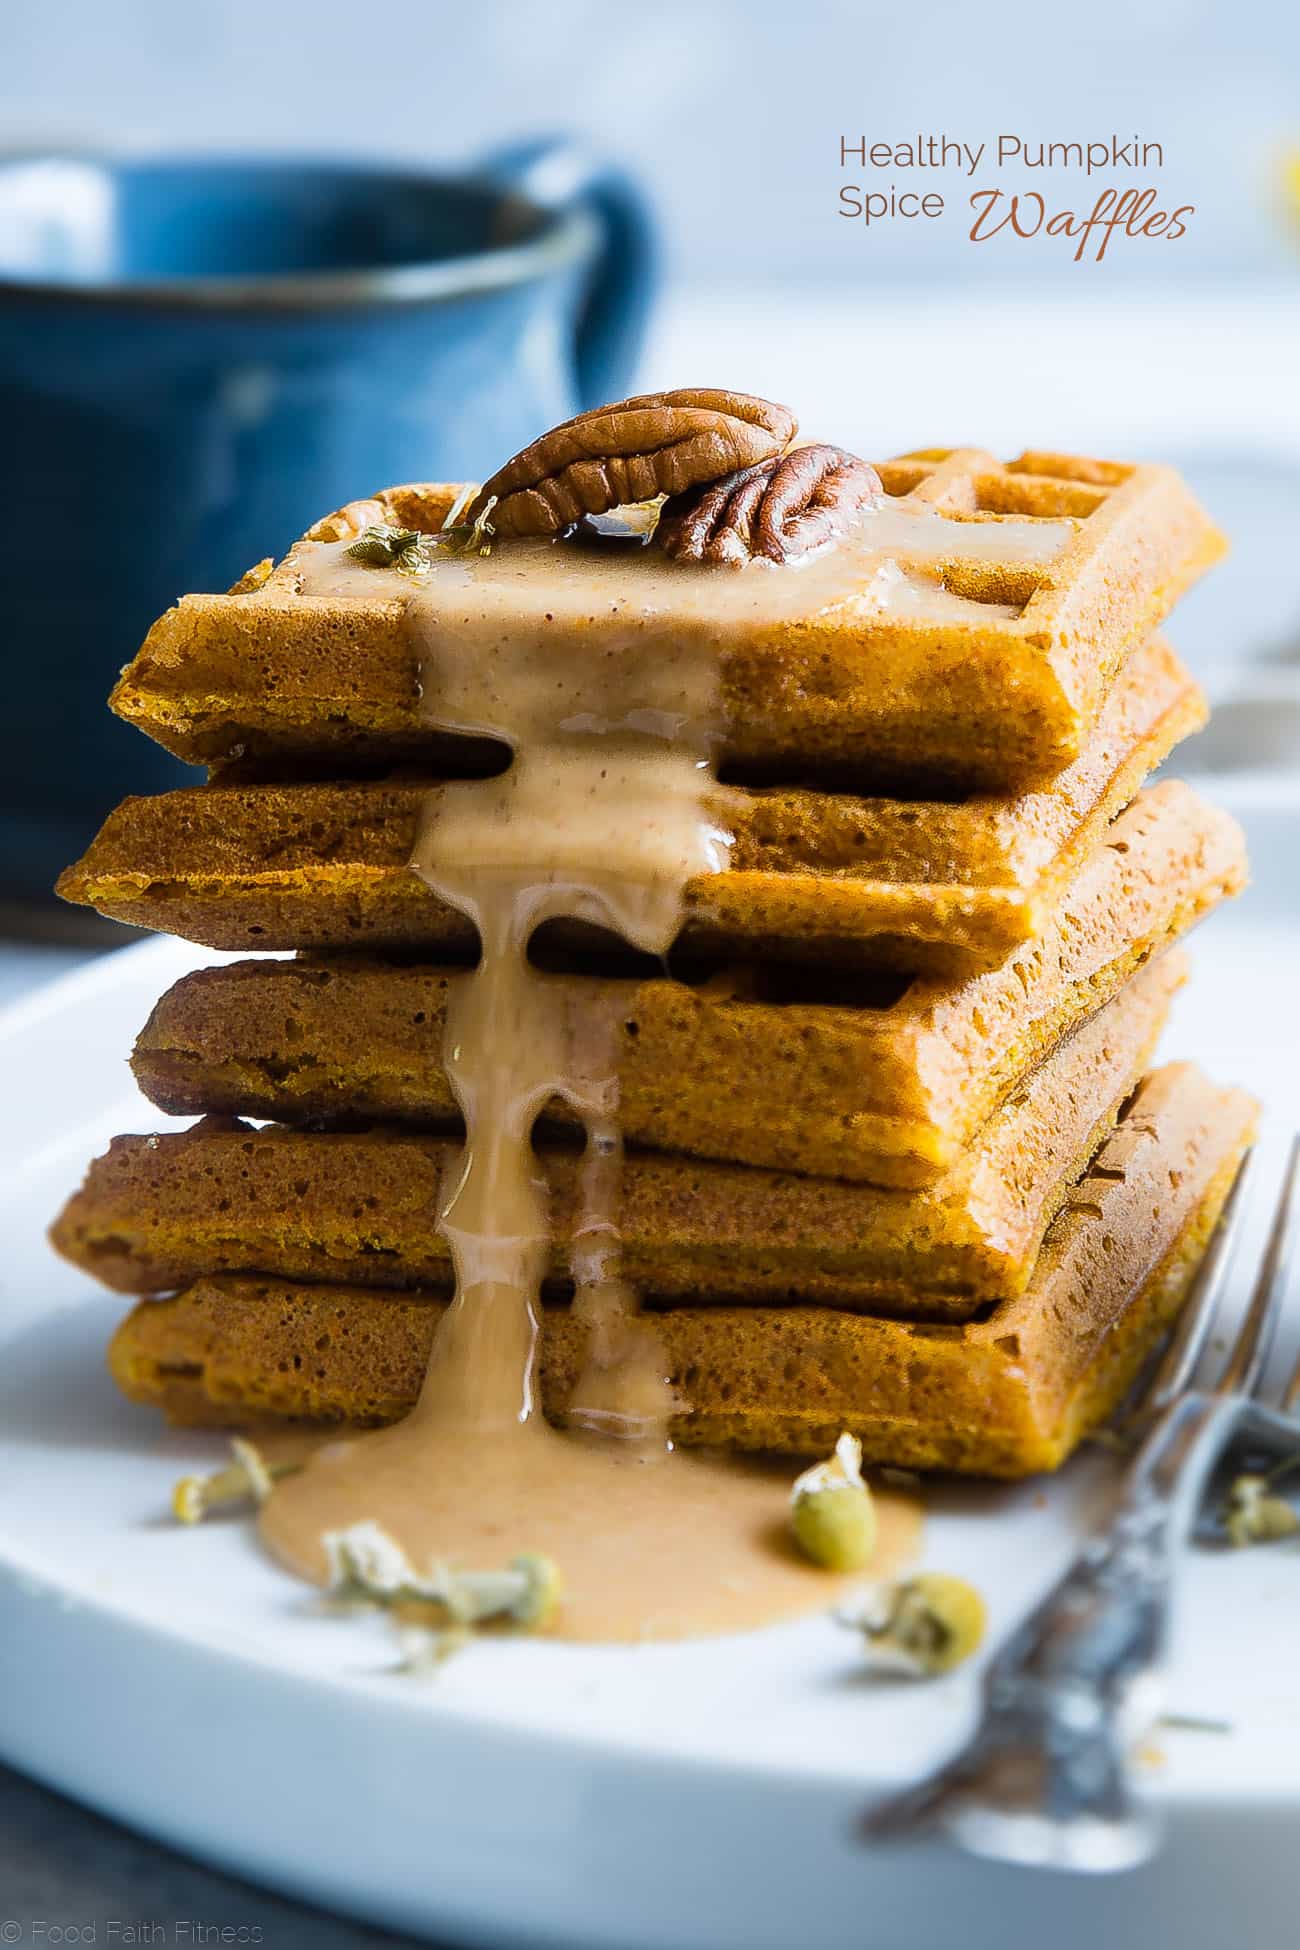 The BEST Pumpkin Spice Paleo Waffles with Pumpkin Cream Sauce - SO light, crispy and airy that you will NEVER believe that these are vegan friendly and gluten, grain, dairy AND sugar free! | Foodfaithfitness.com | @FoodFaithFit